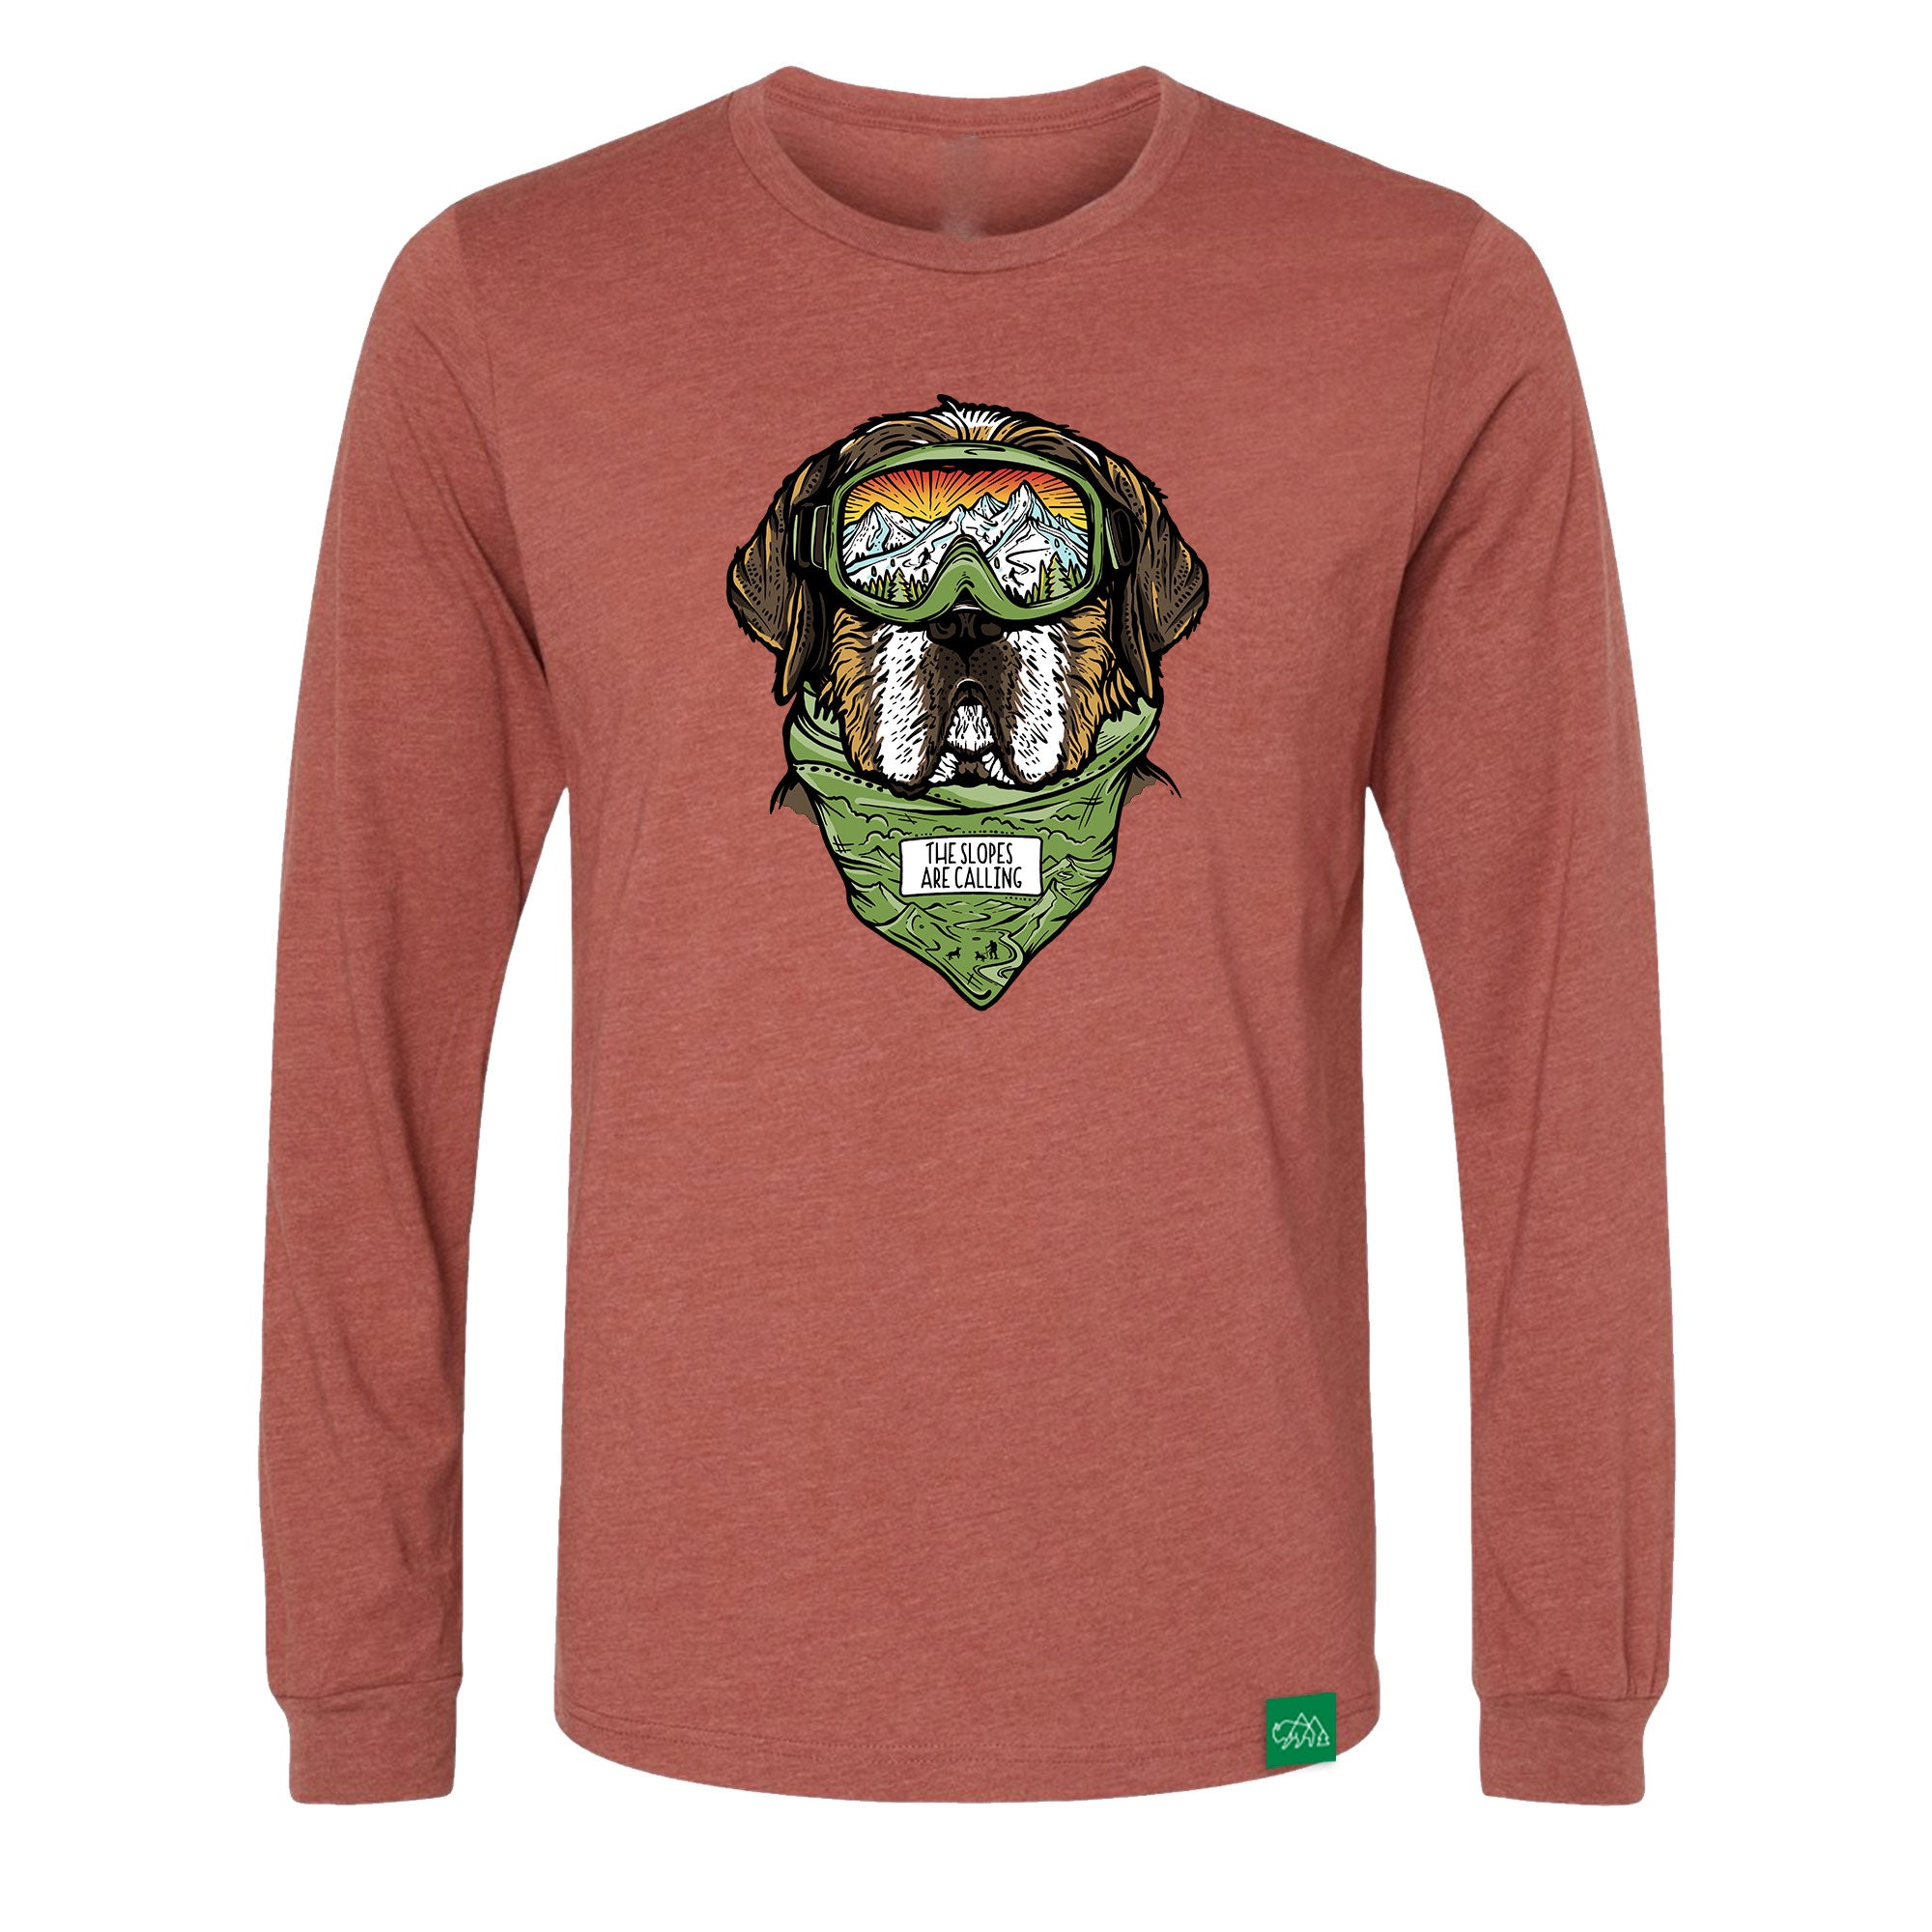 Slopes are Calling Long Sleeve T-Shirt